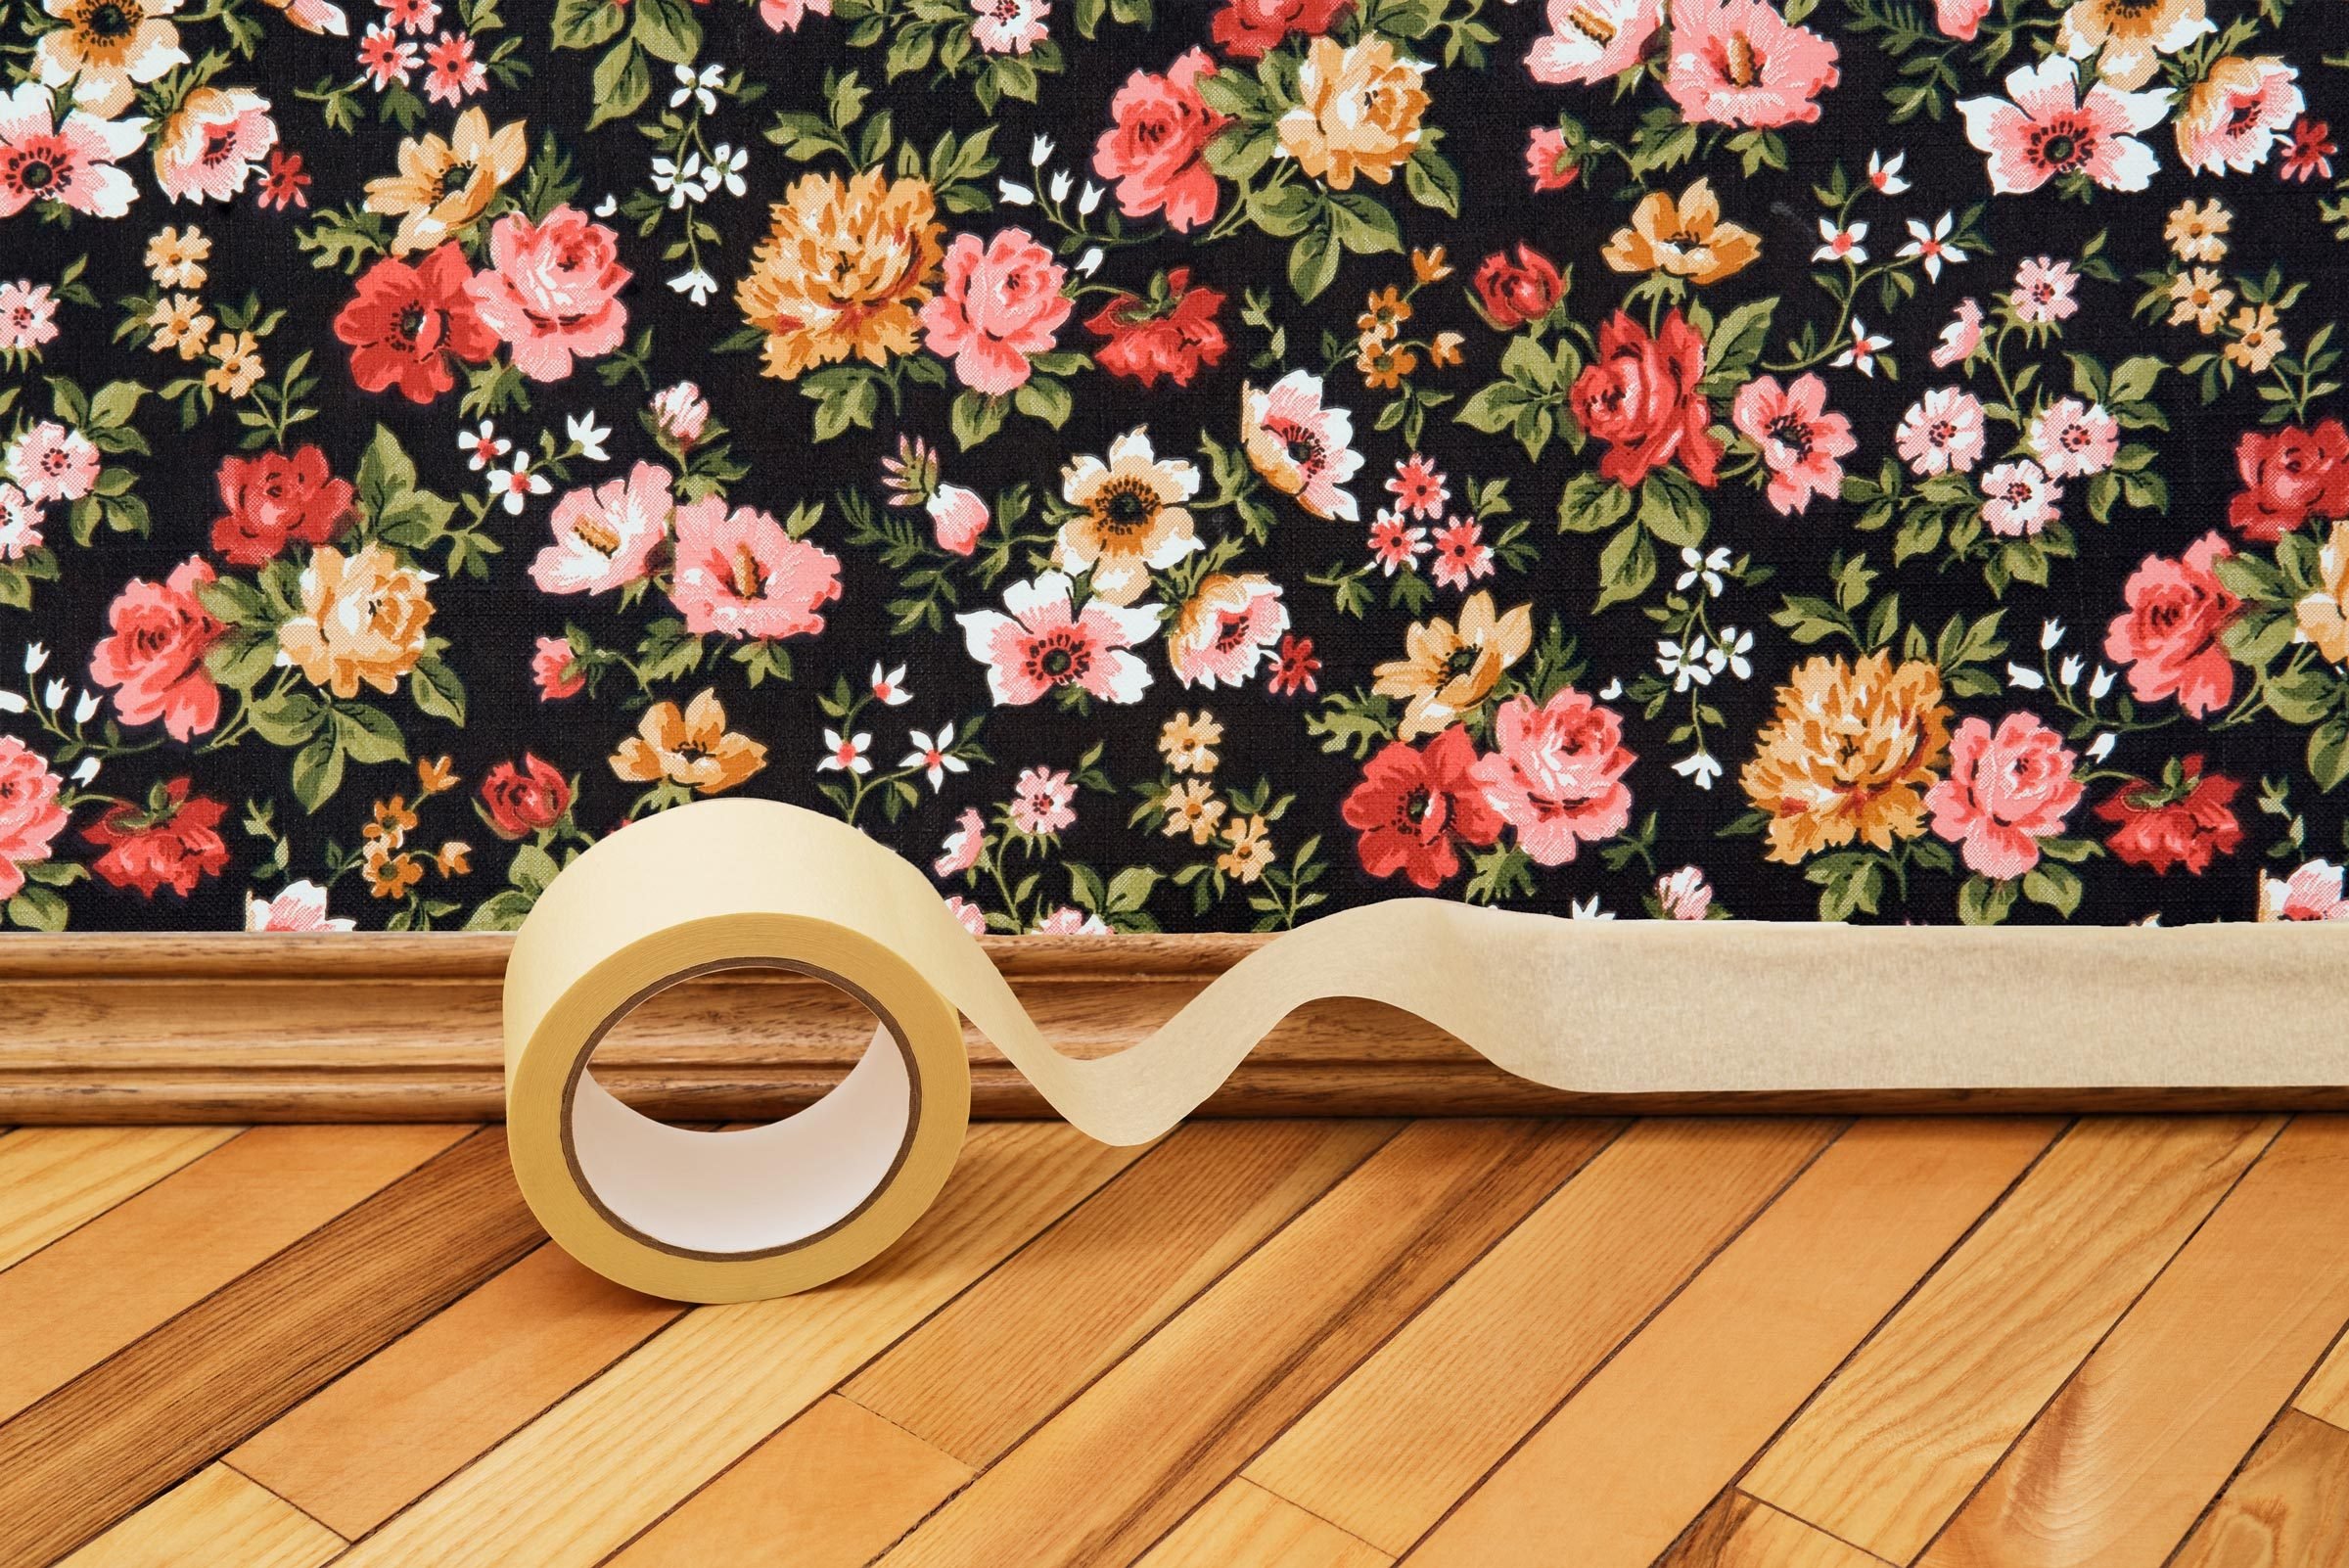 putting masking tape on the Baseboard with a floral wallpaper wall